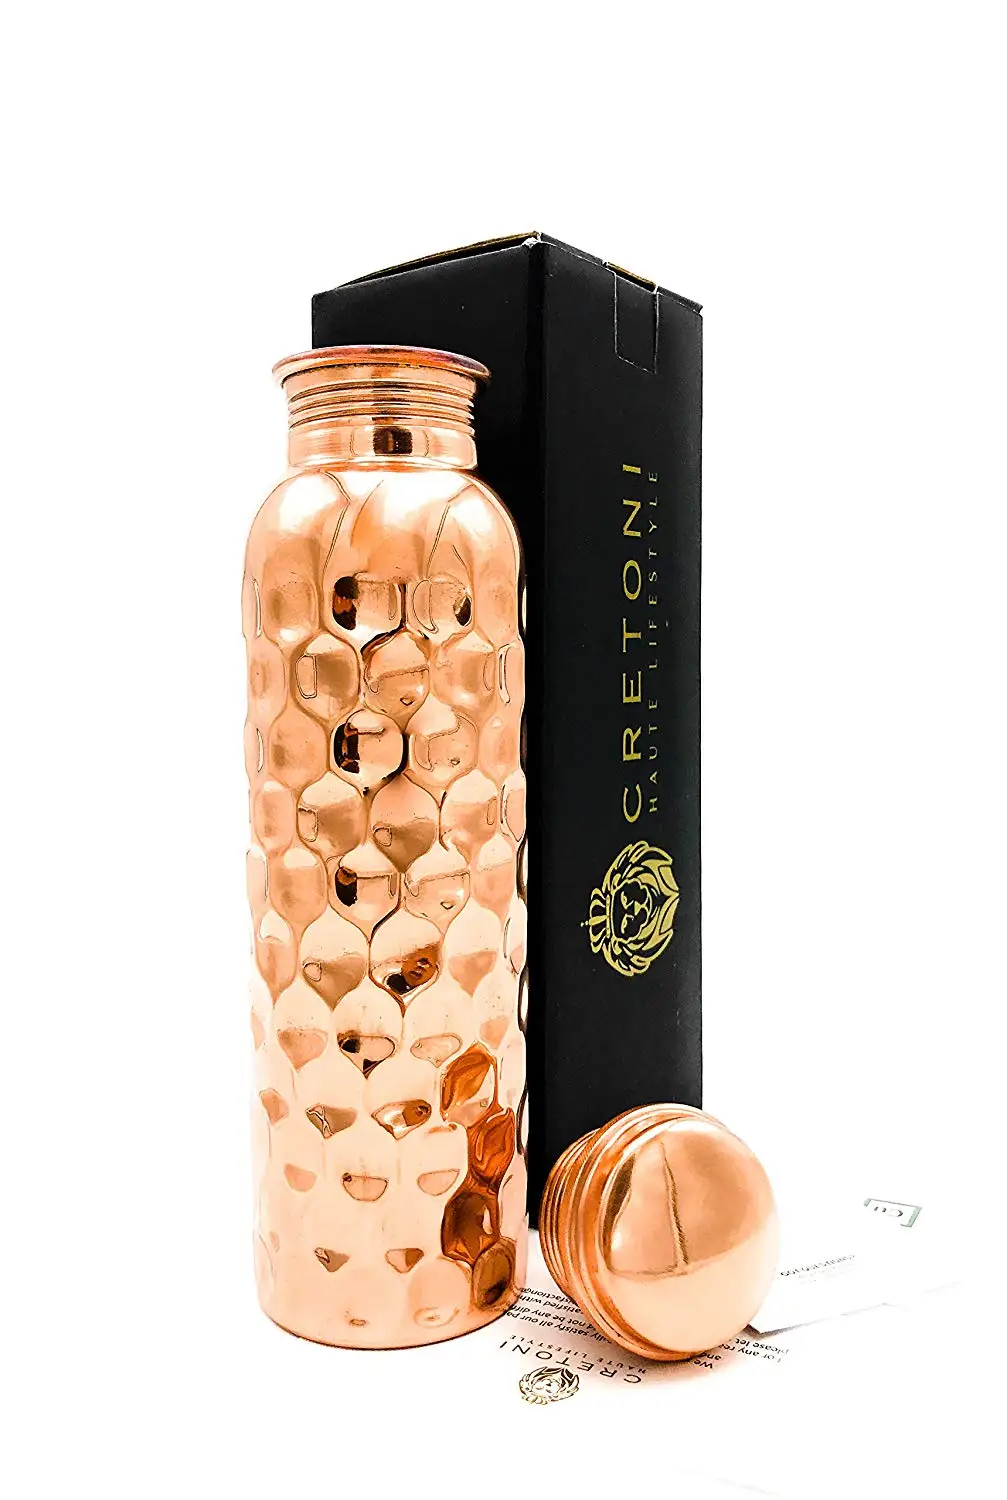 INDIAN BAZAAR CRAFTS Hammered Copper Yoga Water Bottle Silver touch quoted Thermos Flask Capacity Handmade/& Leak Proof Ayurvedic Health Benefits,Sports,Gym,Yoga /& Travel 1 ltr